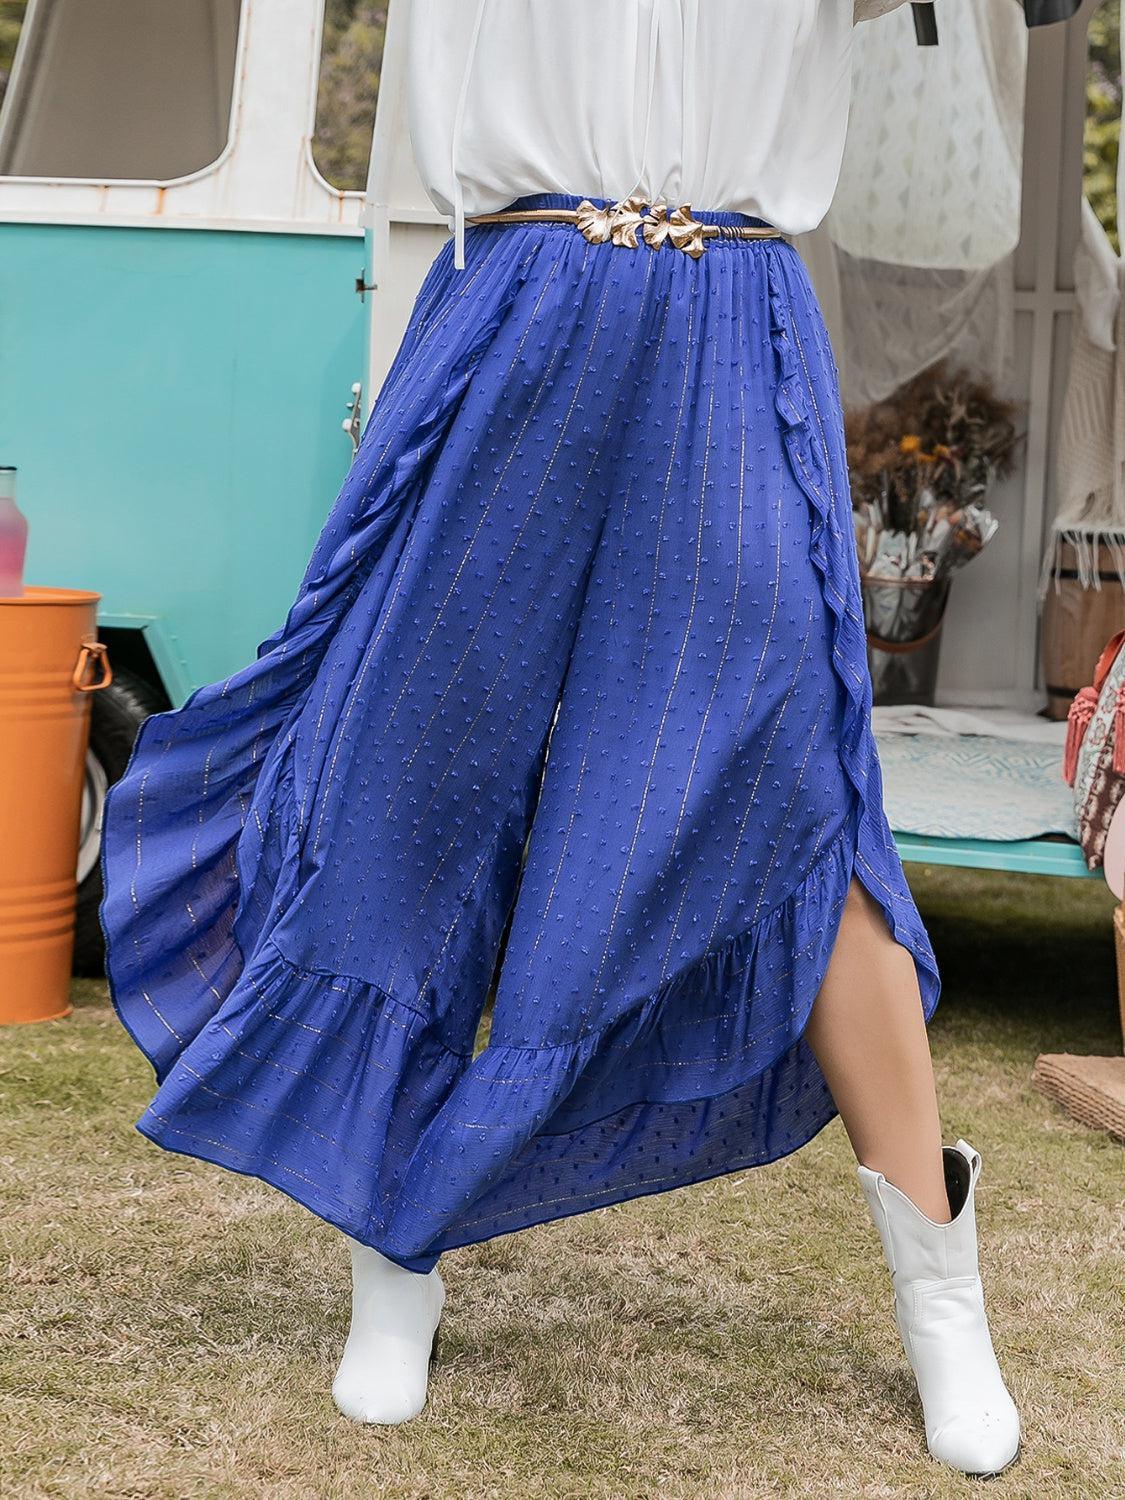 a woman wearing a blue skirt and white shirt